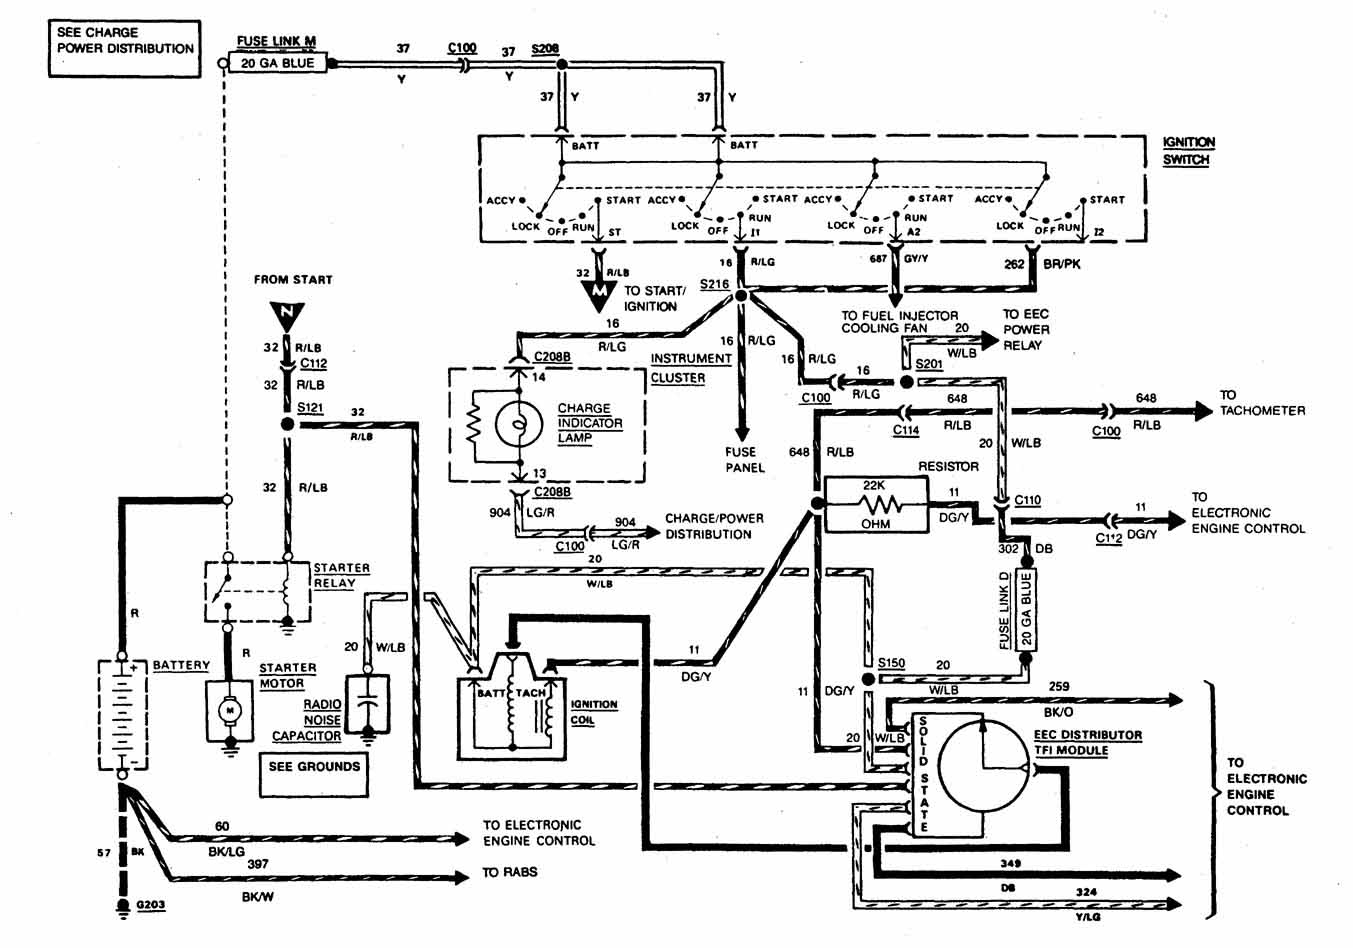 Wiring Diagram 1989 Ford F150 - Data Wiring Diagram Site - Ford F150 Starter Solenoid Wiring Diagram